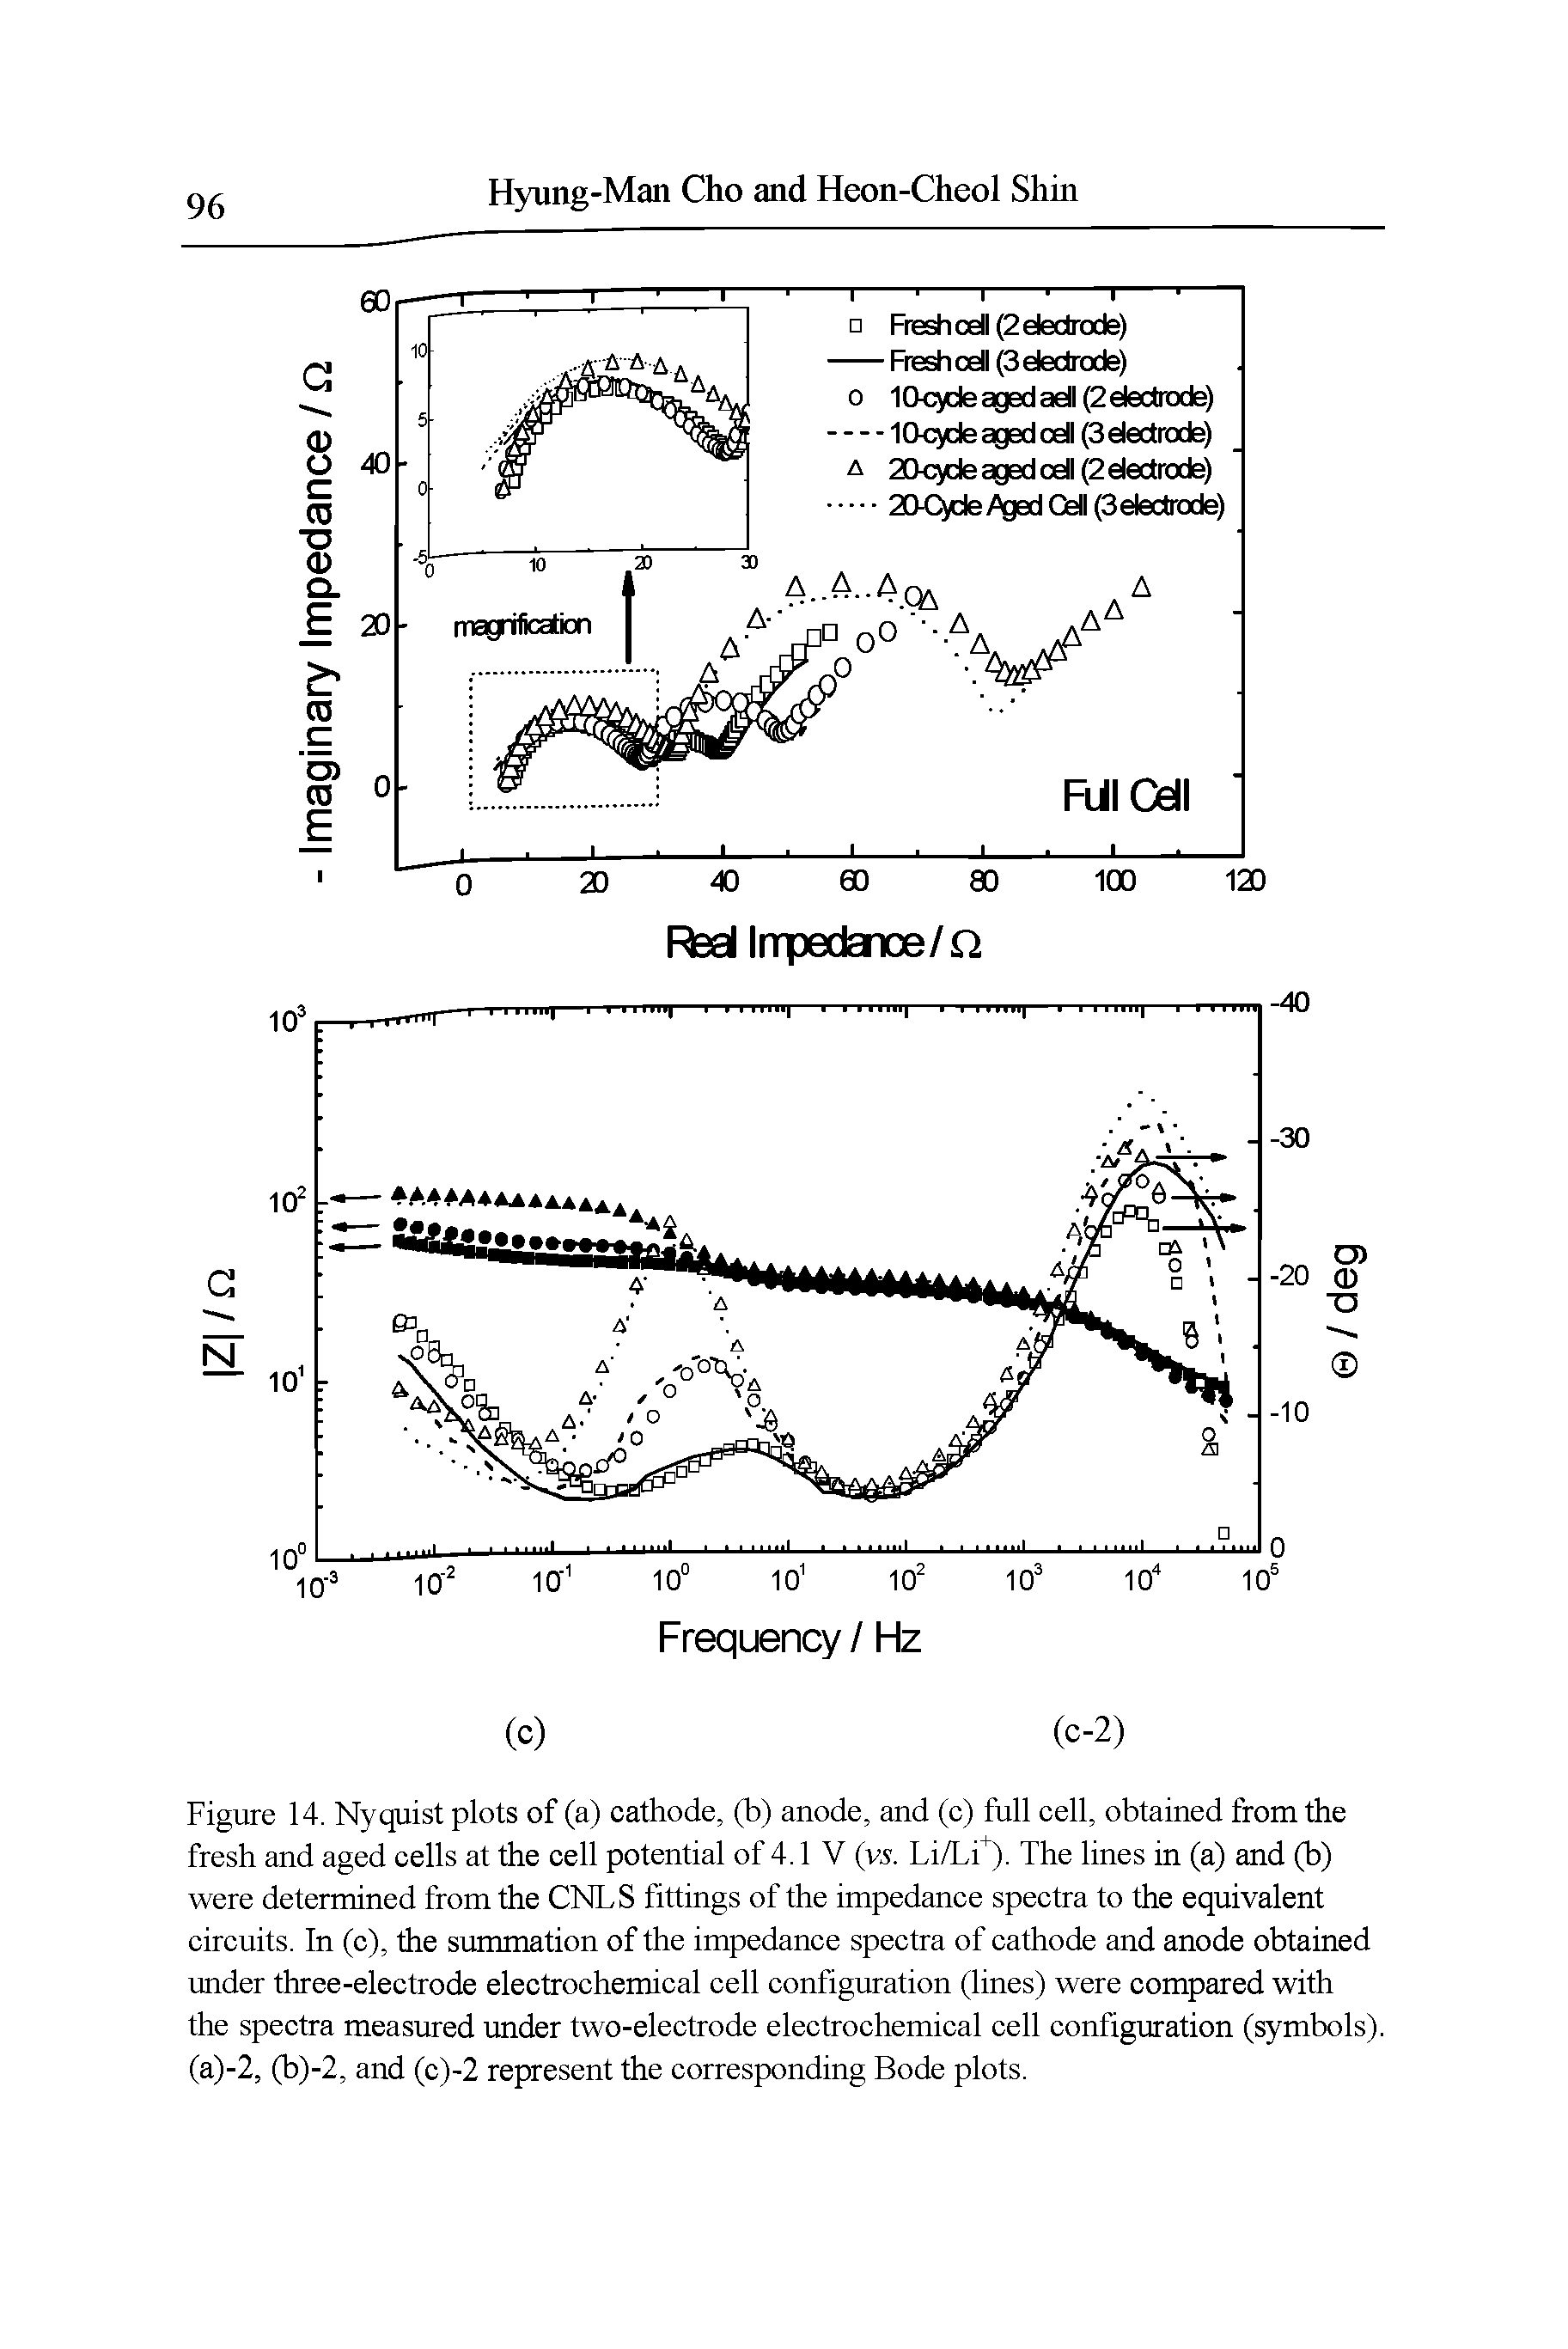 Figure 14. Nyquist plots of (a) cathode, (b) anode, and (c) full cell, obtained from the fresh and aged cells at the cell potential of 4.1 V (vs. LifLi). The lines in (a) and (b) were determined from the CNLS fittings of the impedance spectra to the equivalent circuits. In (c), the summation of the impedance spectra of cathode and anode obtained under three-electrode electrochemical cell configuration (lines) were compared with the spectra measured tmder two-electrode electrochemical cell configuration (symbols). (a)-2, (b)-2, and (c)-2 represent the corresponding Bode plots.